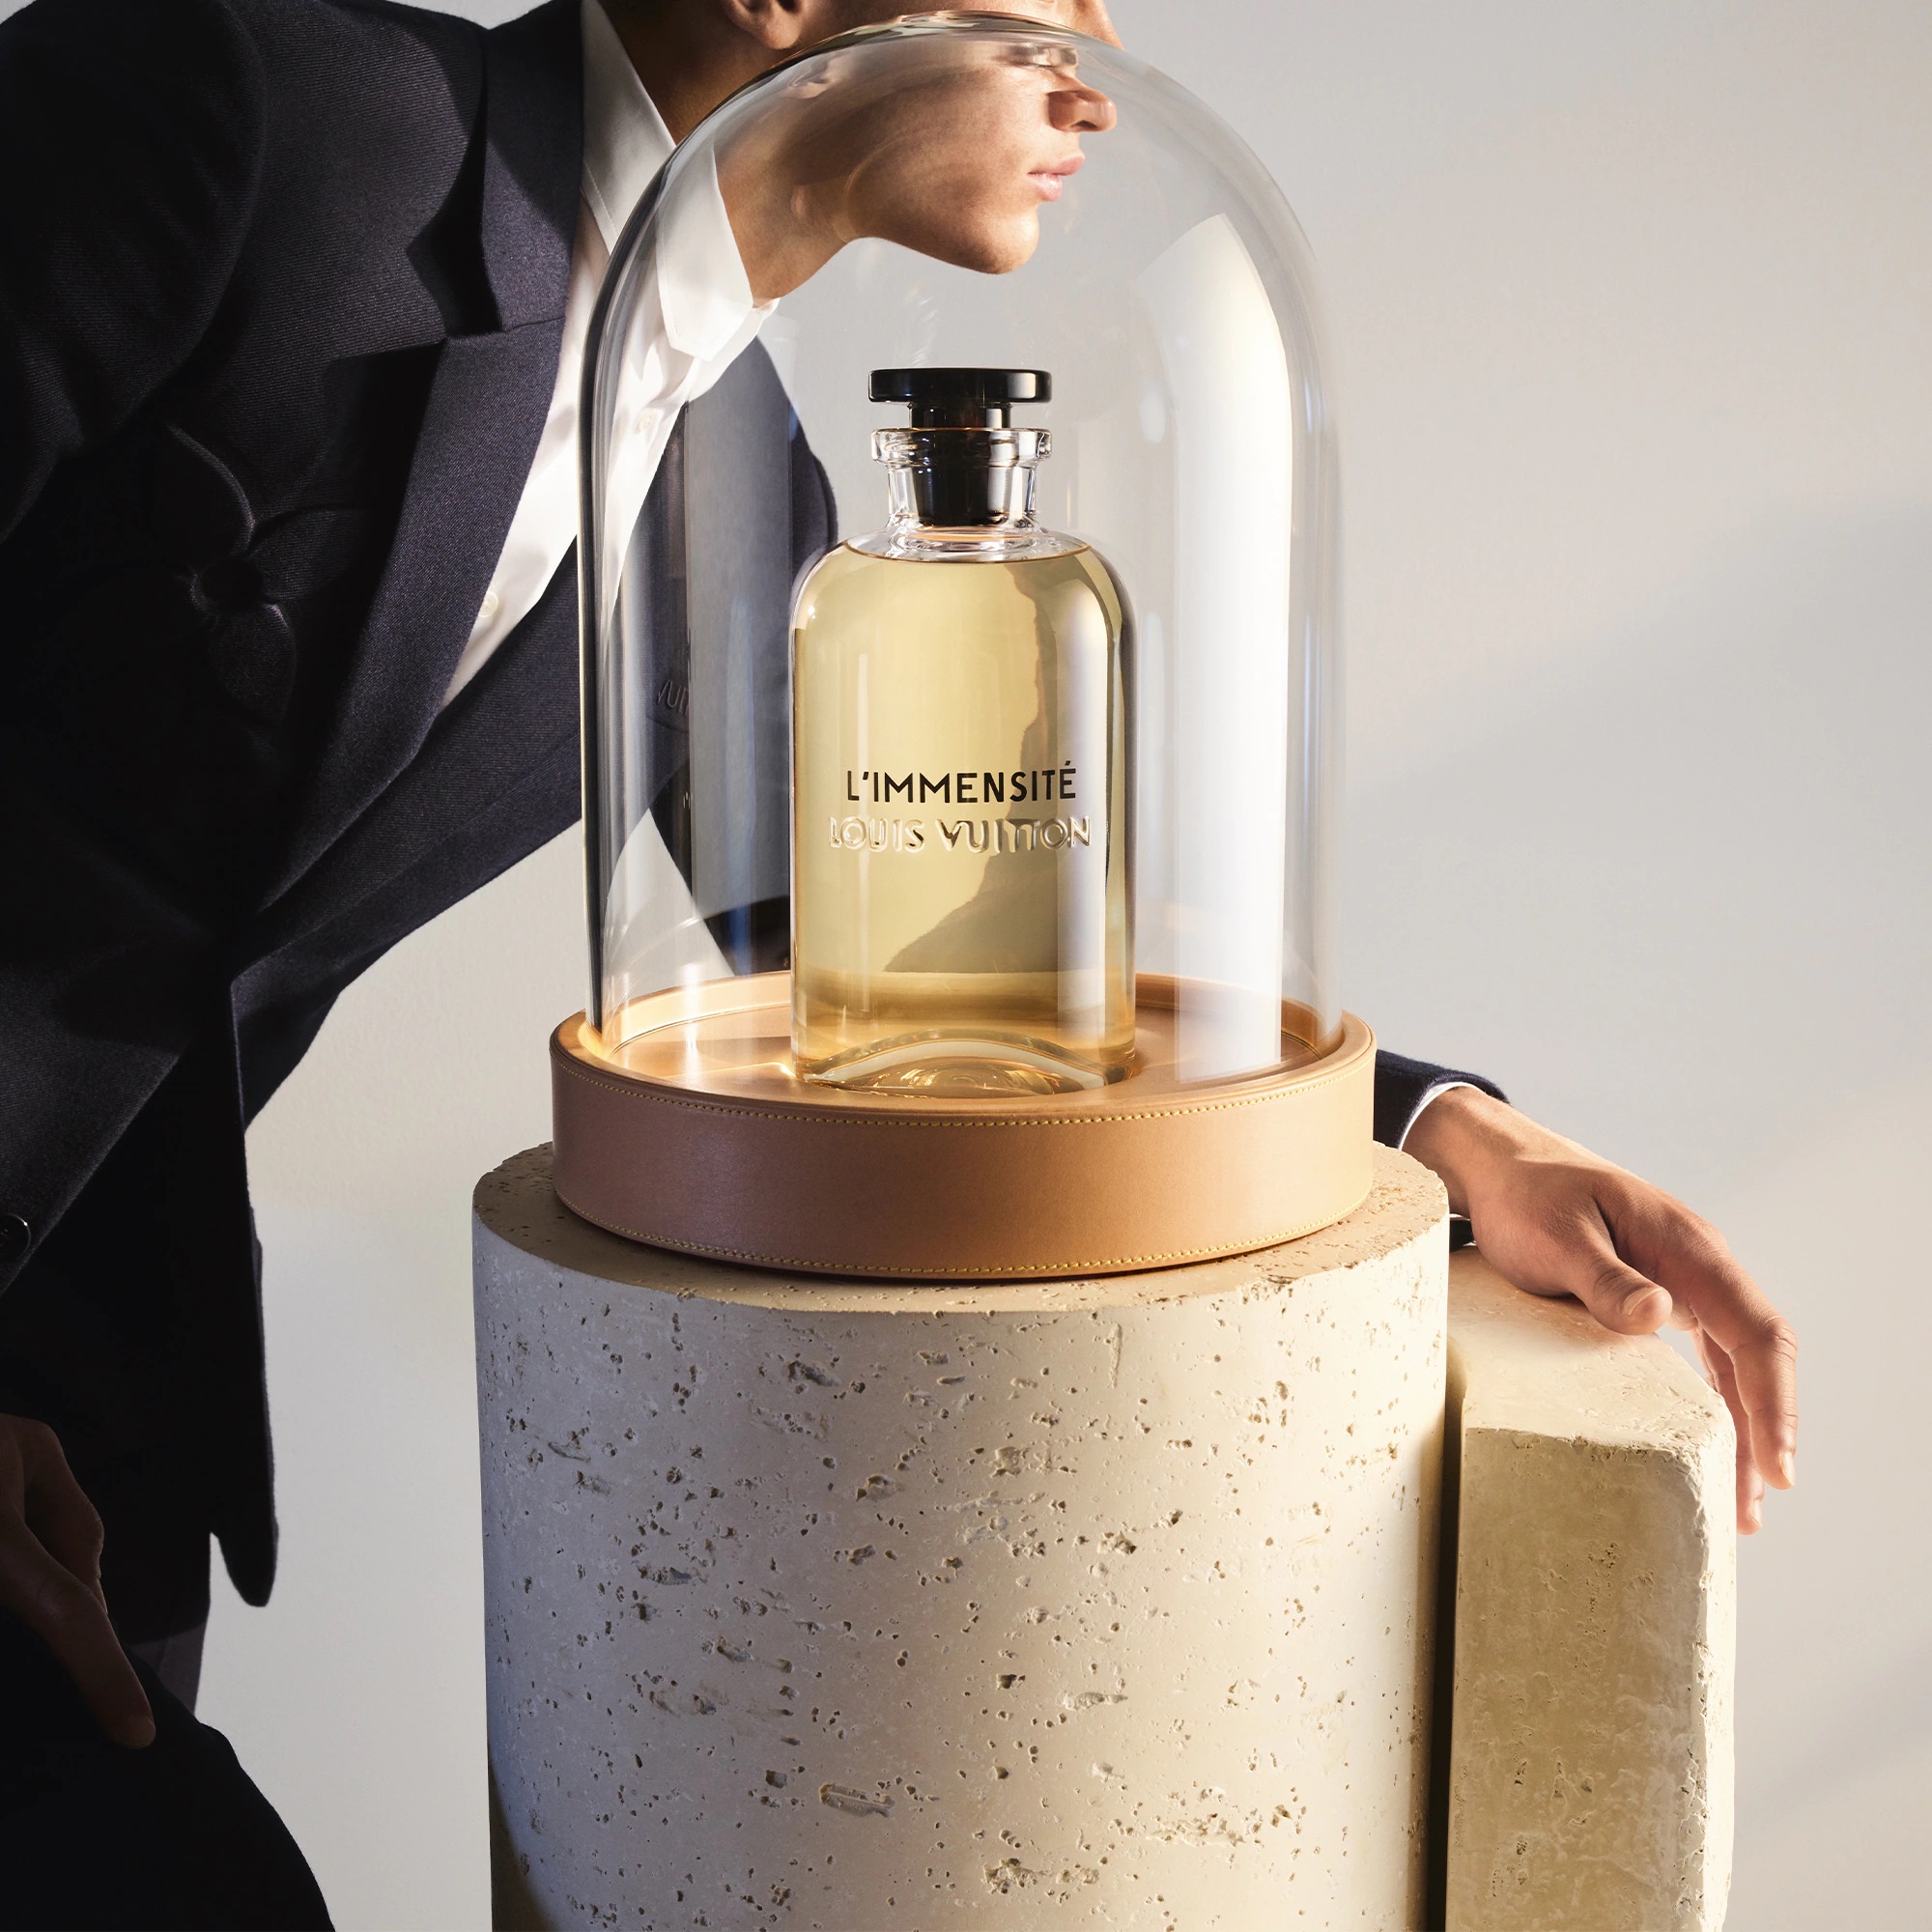 Louis Vuitton on X: The promise of new horizons. Embodying the Maison's  Spirit of Travel, #LouisVuitton fragrances are an invitation to embark on a  journey of the senses. Discover #LVParfums and the